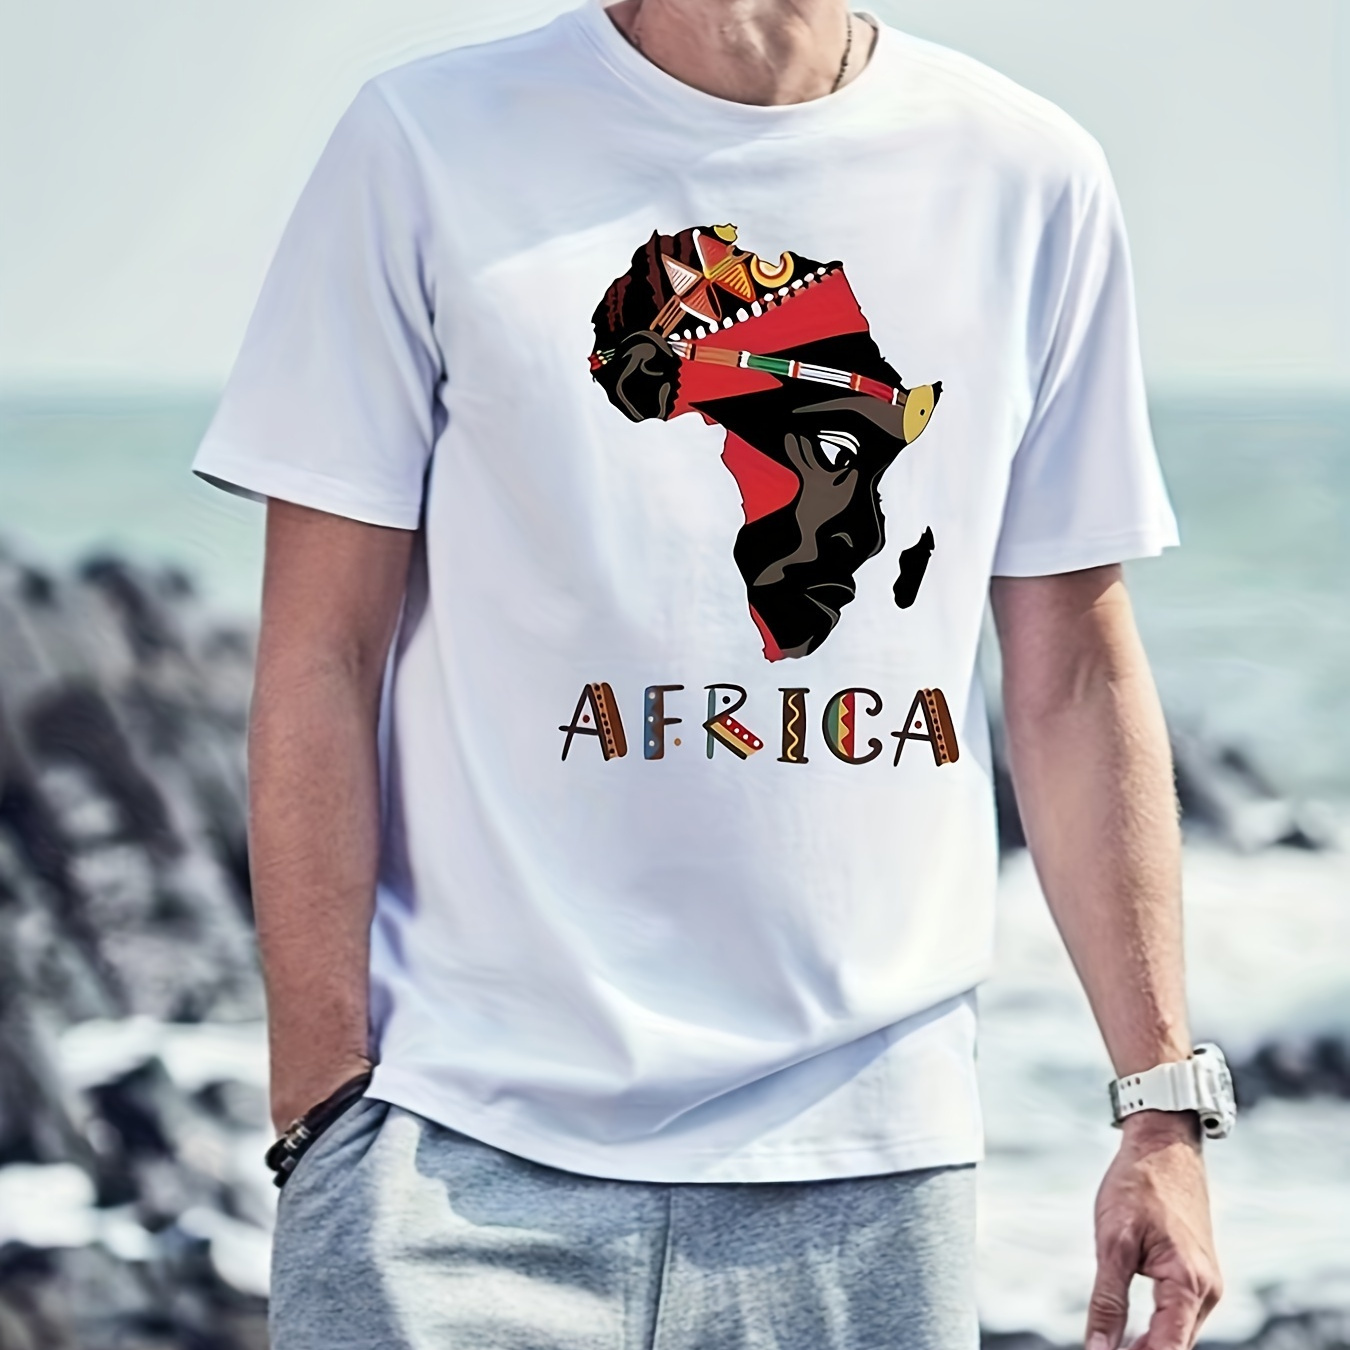 

Africa Print Men's Crew Neck Fashionable Short Sleeve Sports T-shirt, Comfortable And Versatile, For Summer And Spring, Athletic Style, Comfort Fit T-shirt, As Gifts